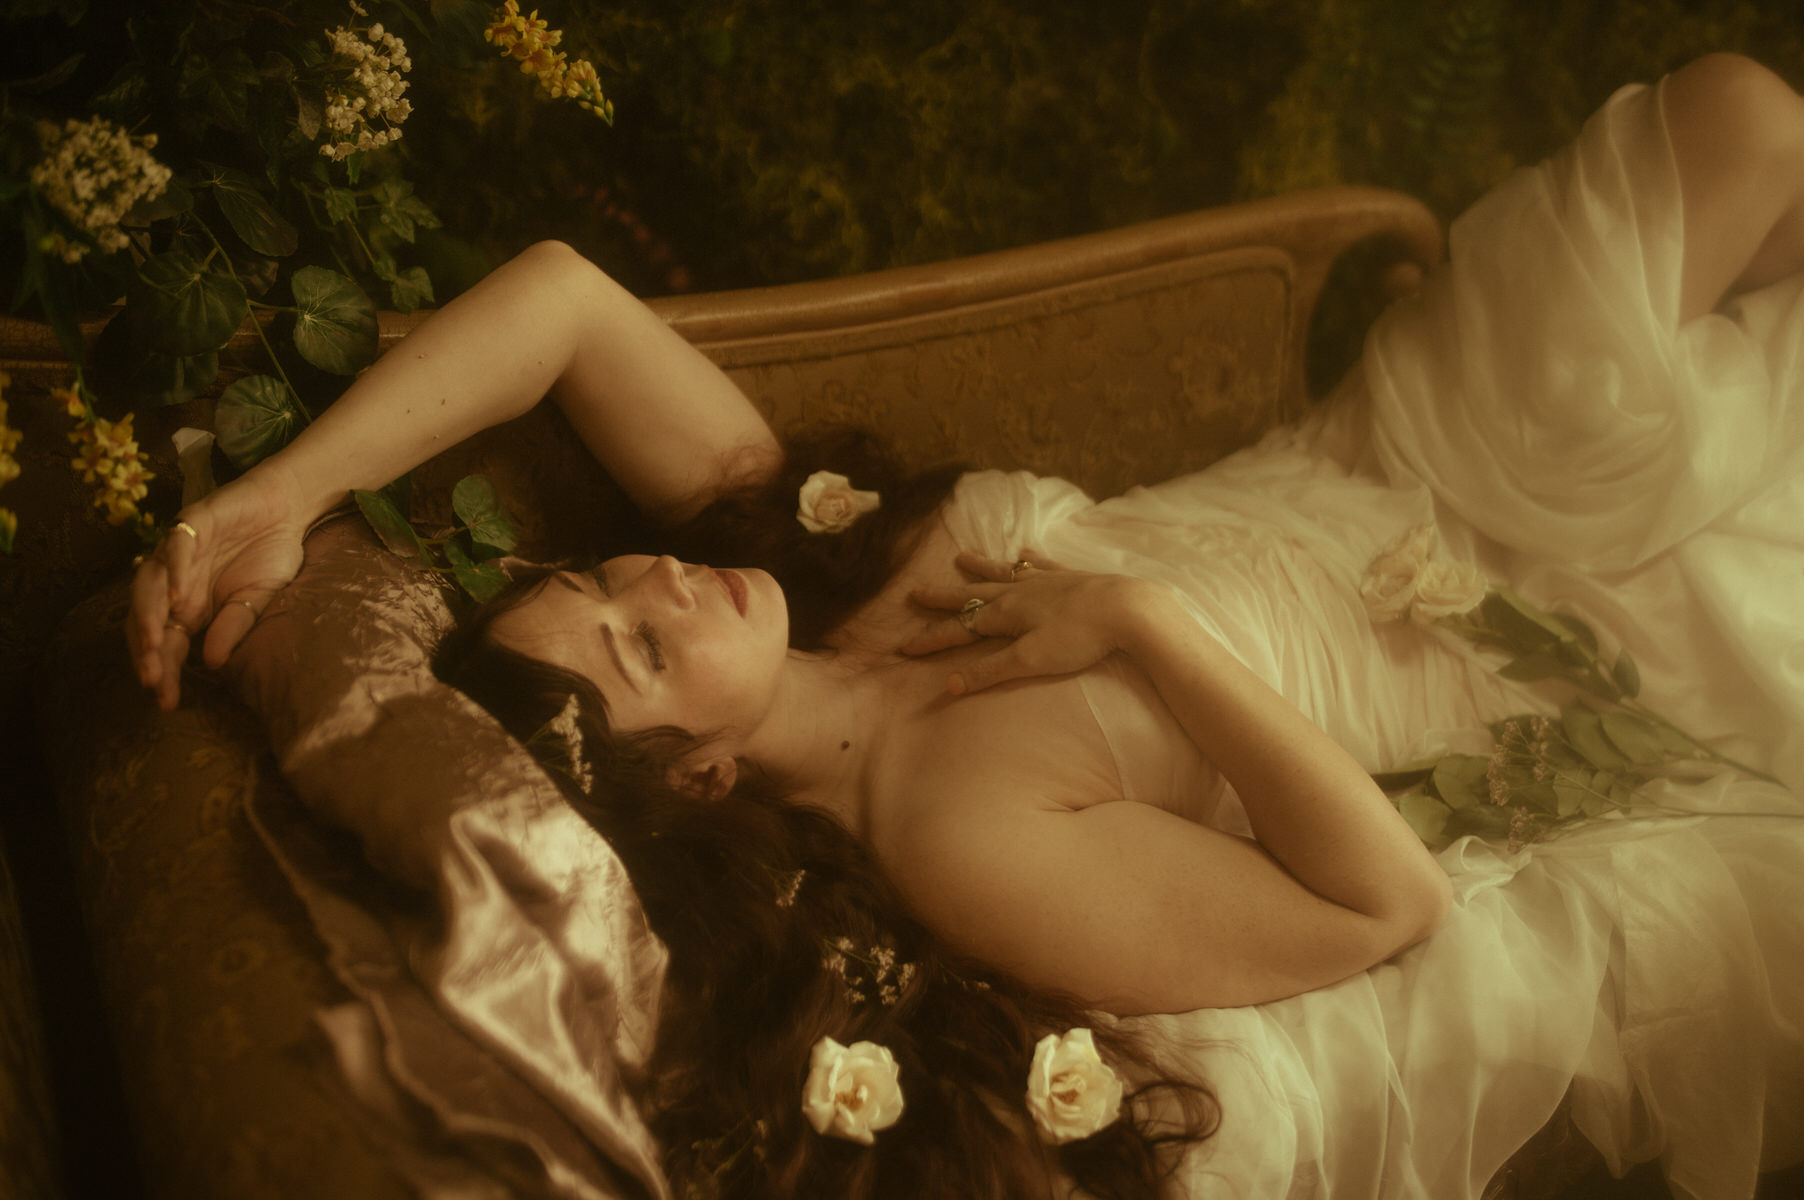 A woman draped in white silk fabric captured in a painterly photo while laying on a bed.